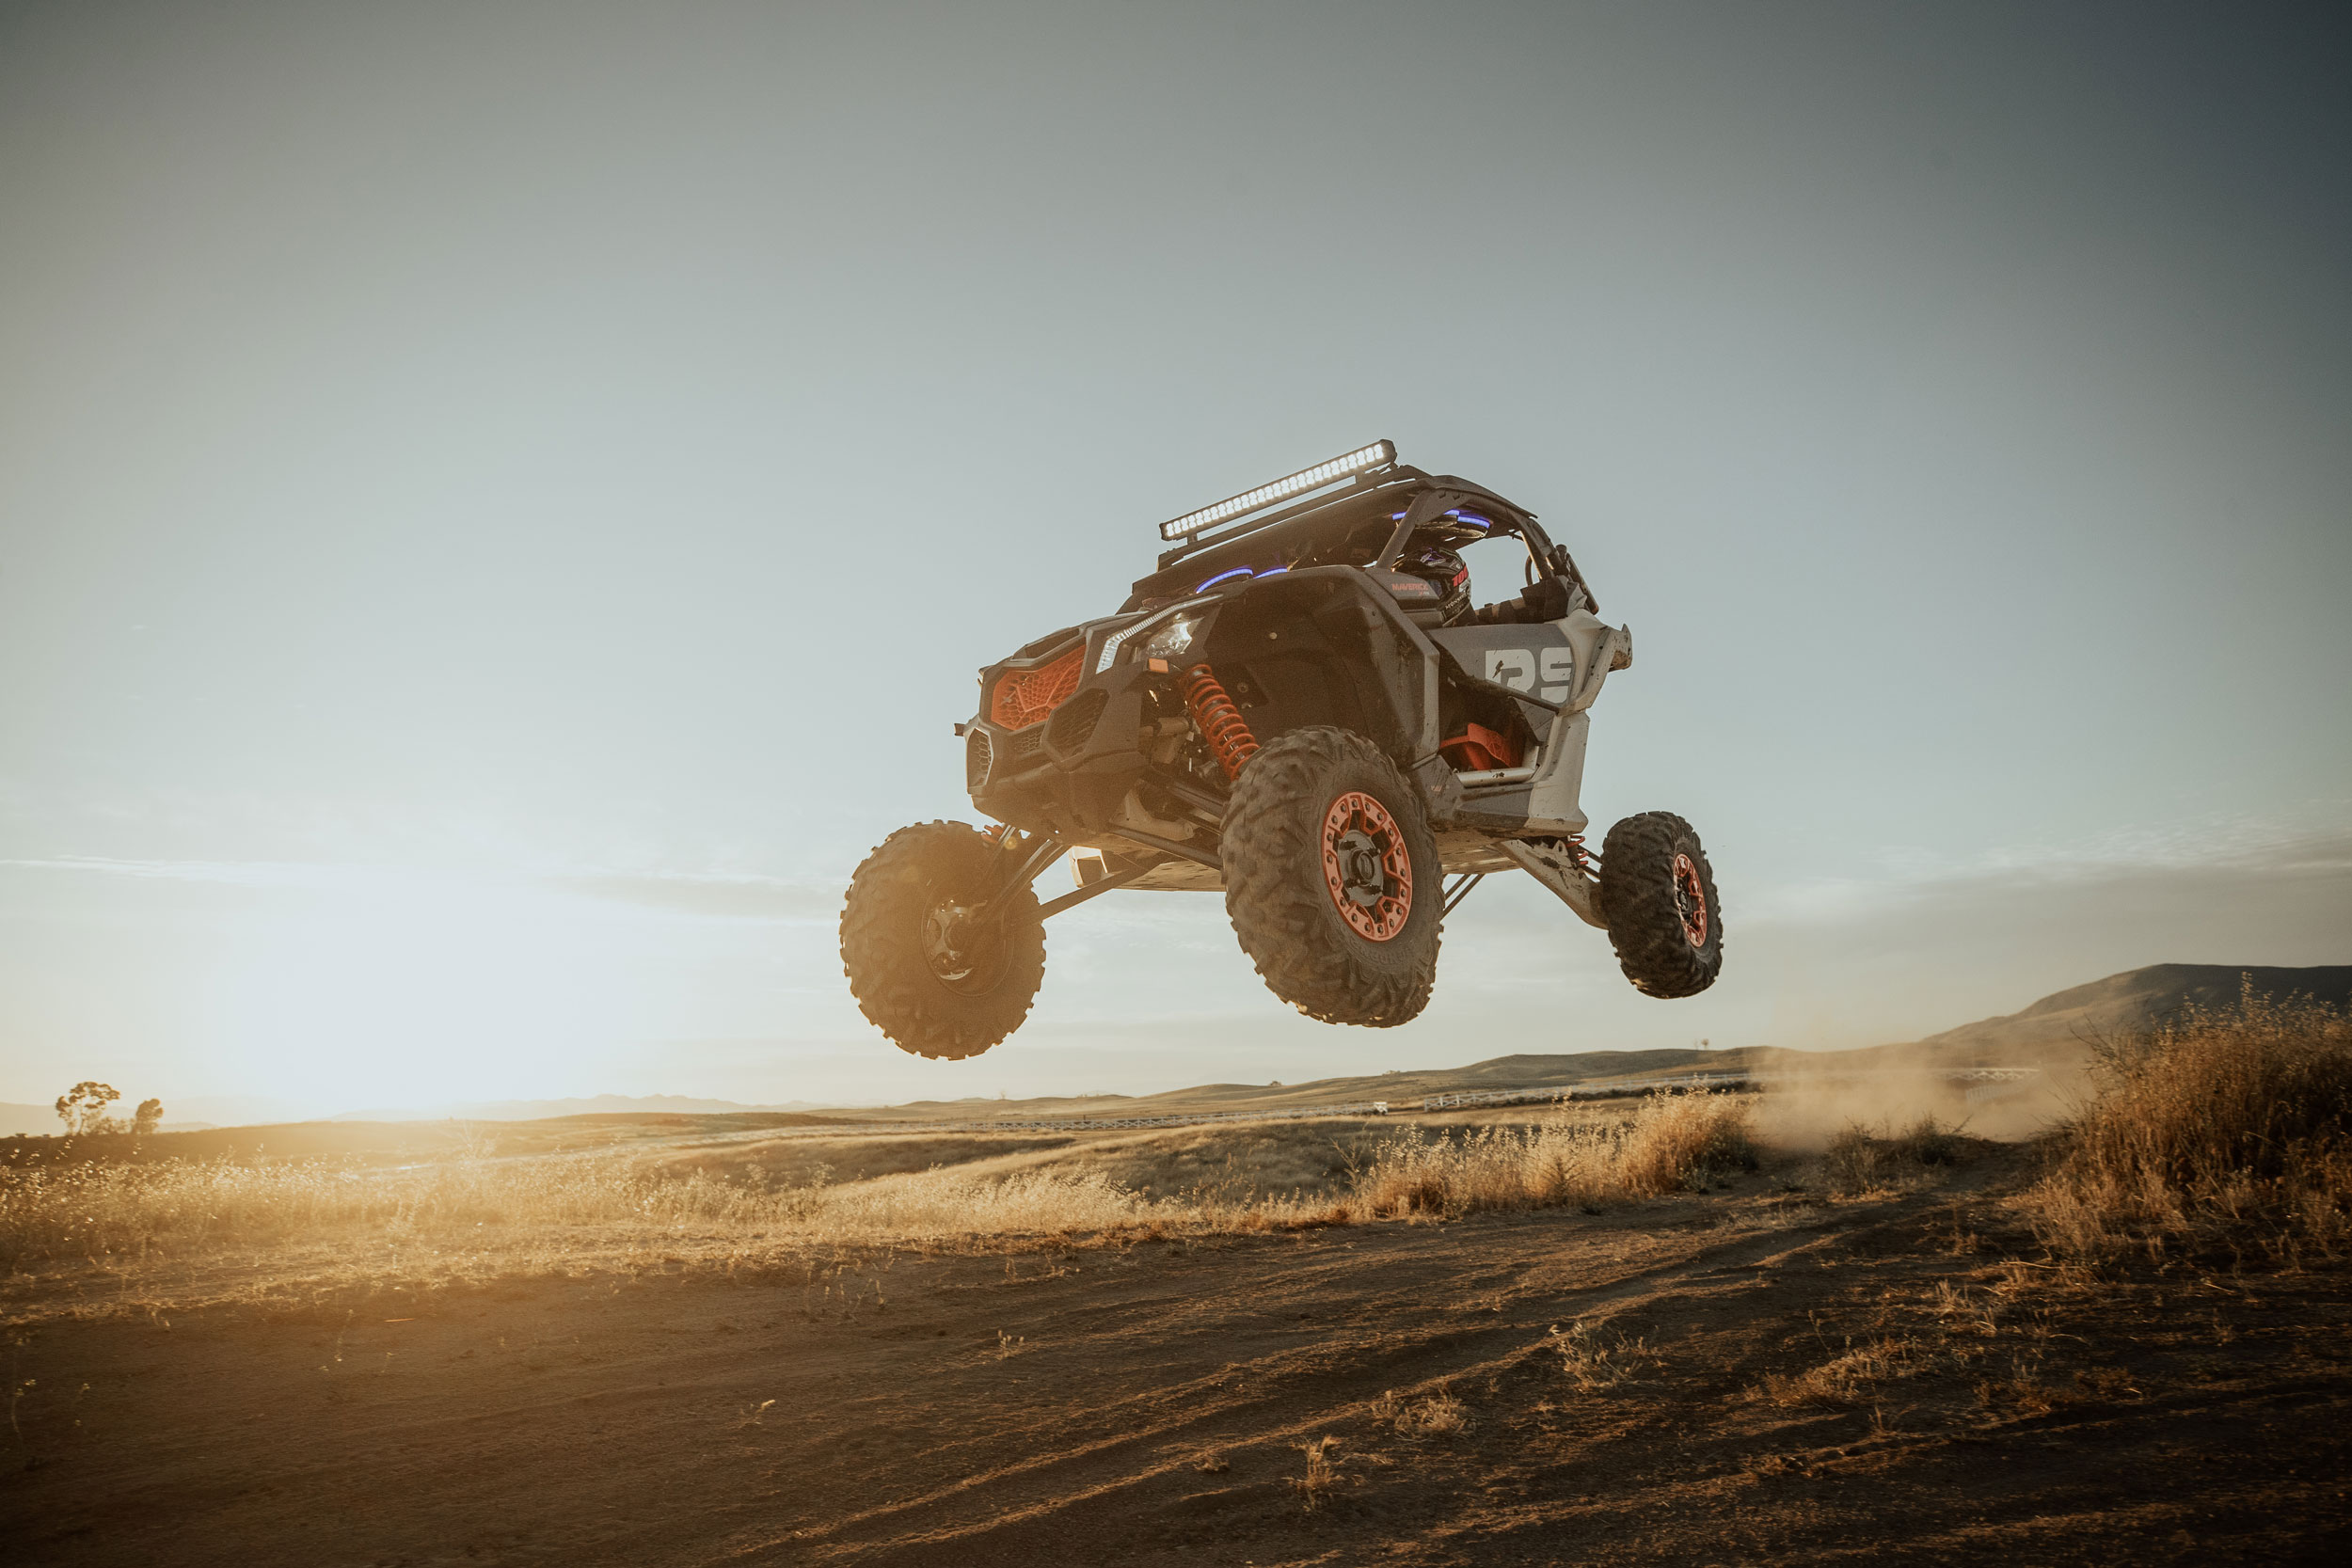 A Can-Am Maverick side-by-side in the air